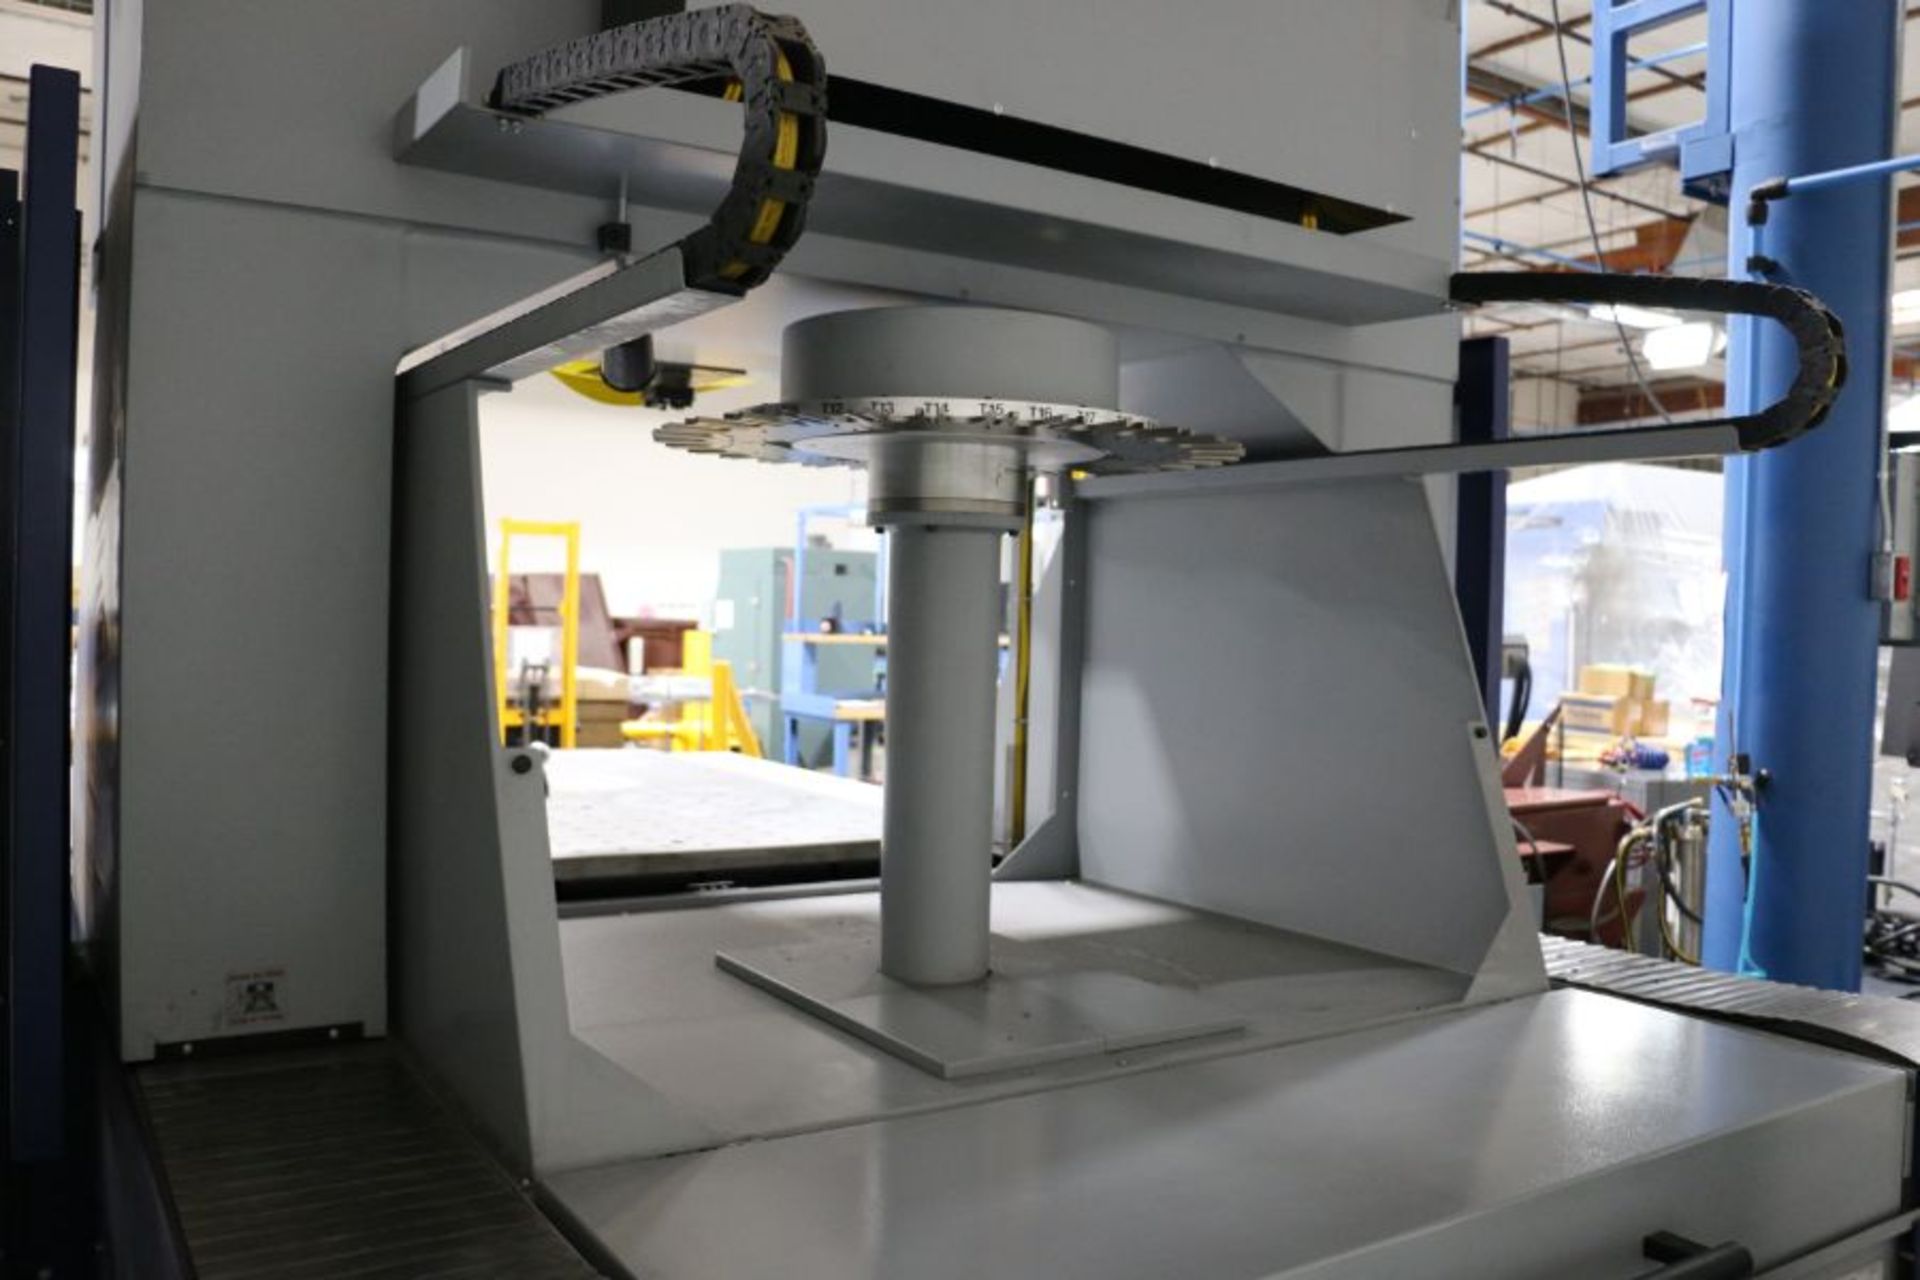 OPS Ingersoll Gantry Eagle 1200 CNC Sinker EDM, Dual 32-Bit Based Control, C-Axis, Powertec 60A - Image 13 of 18